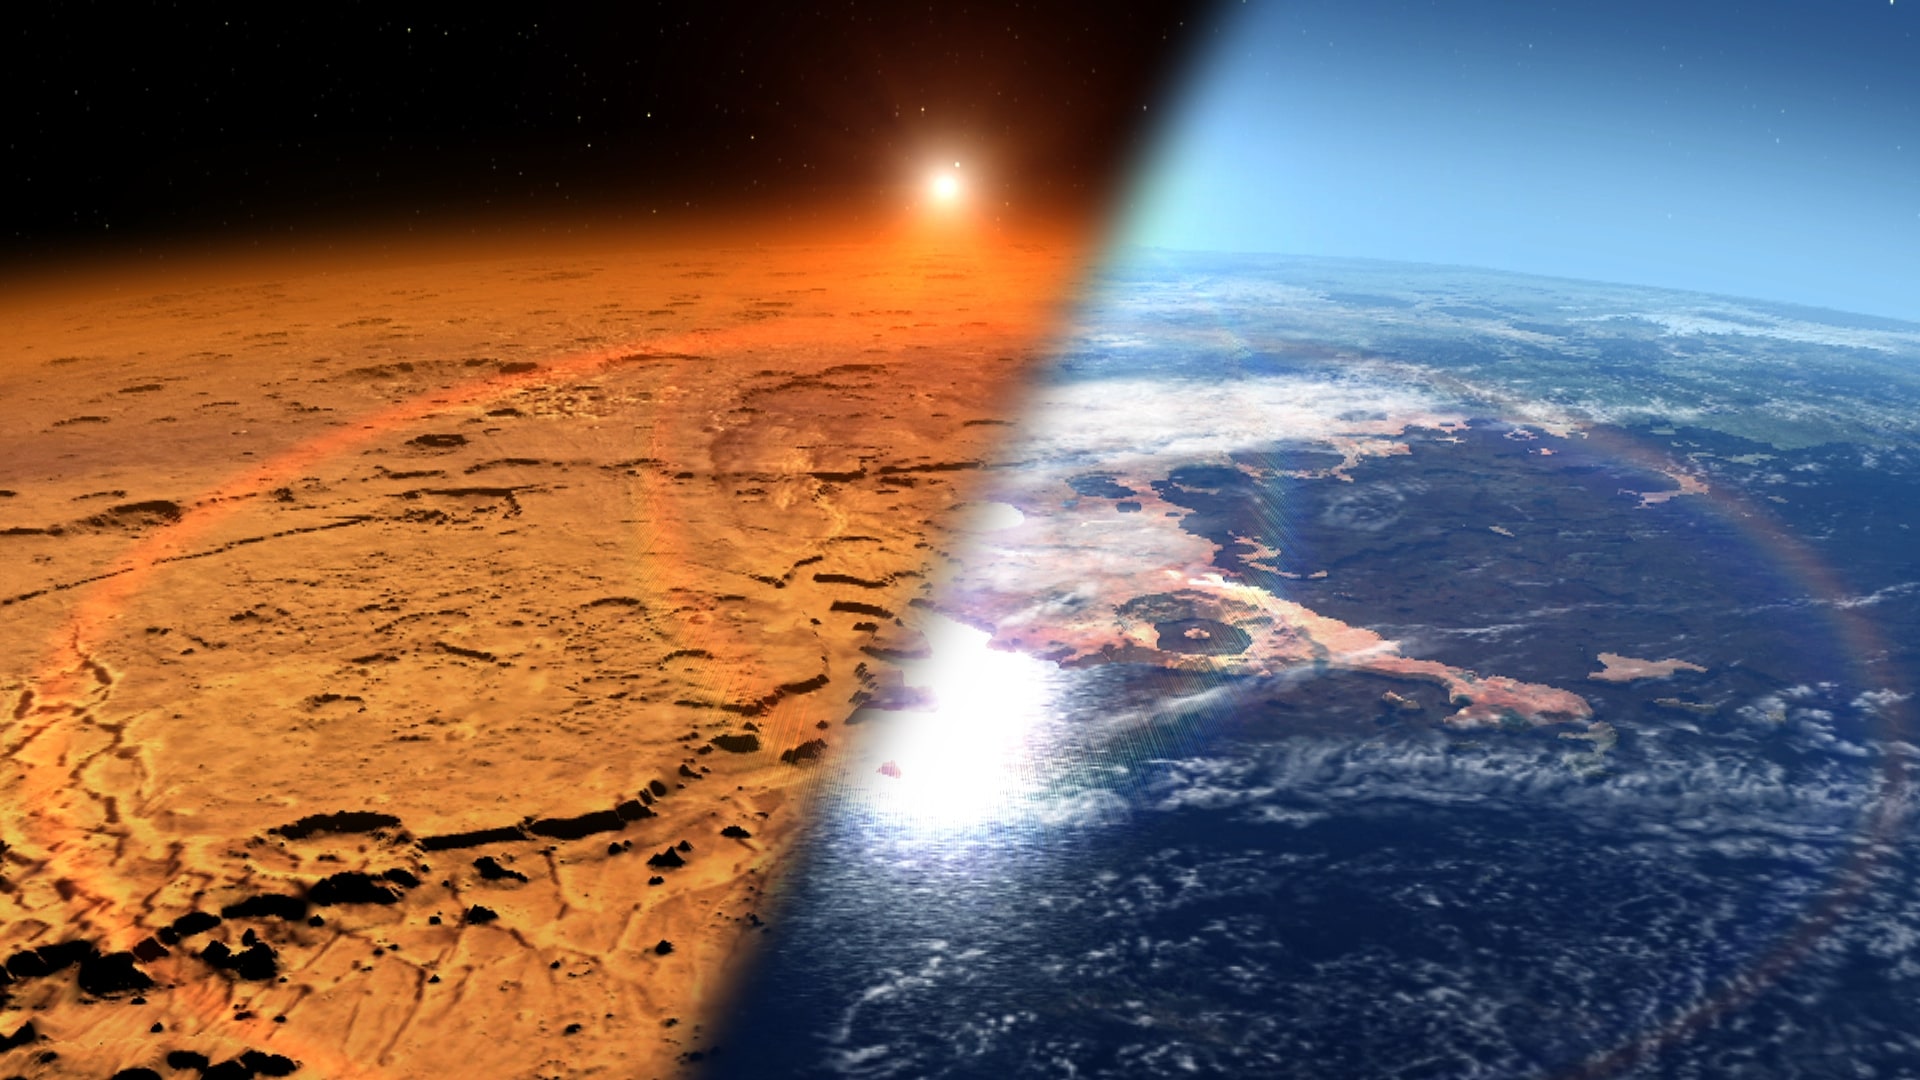 An artist'c concept showing Mars today on the left and Mars as it could have been, covered in water, on the right.